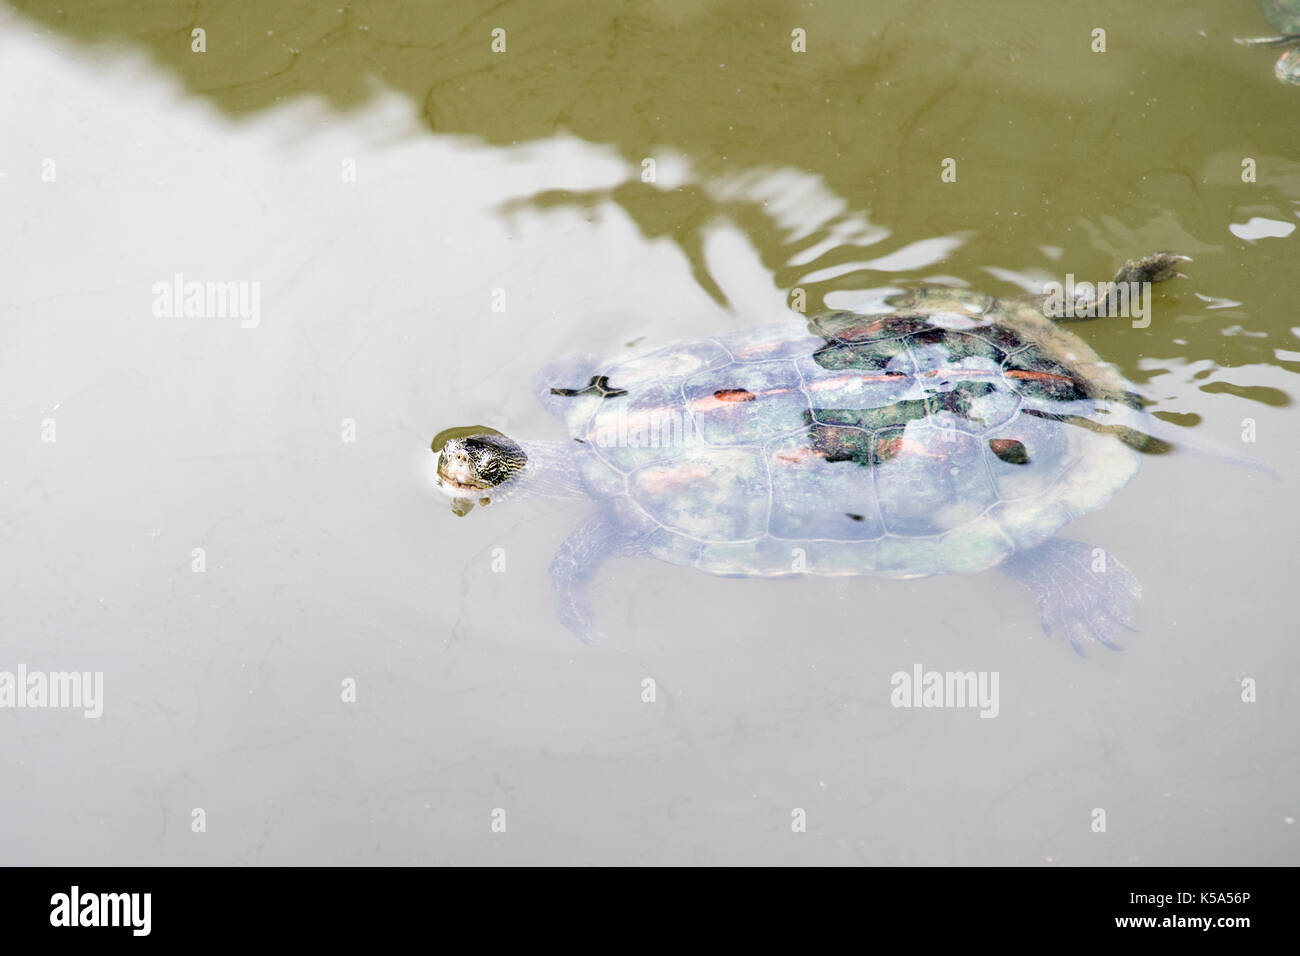 red eared turtle floating in pond water with focus on head Stock Photo